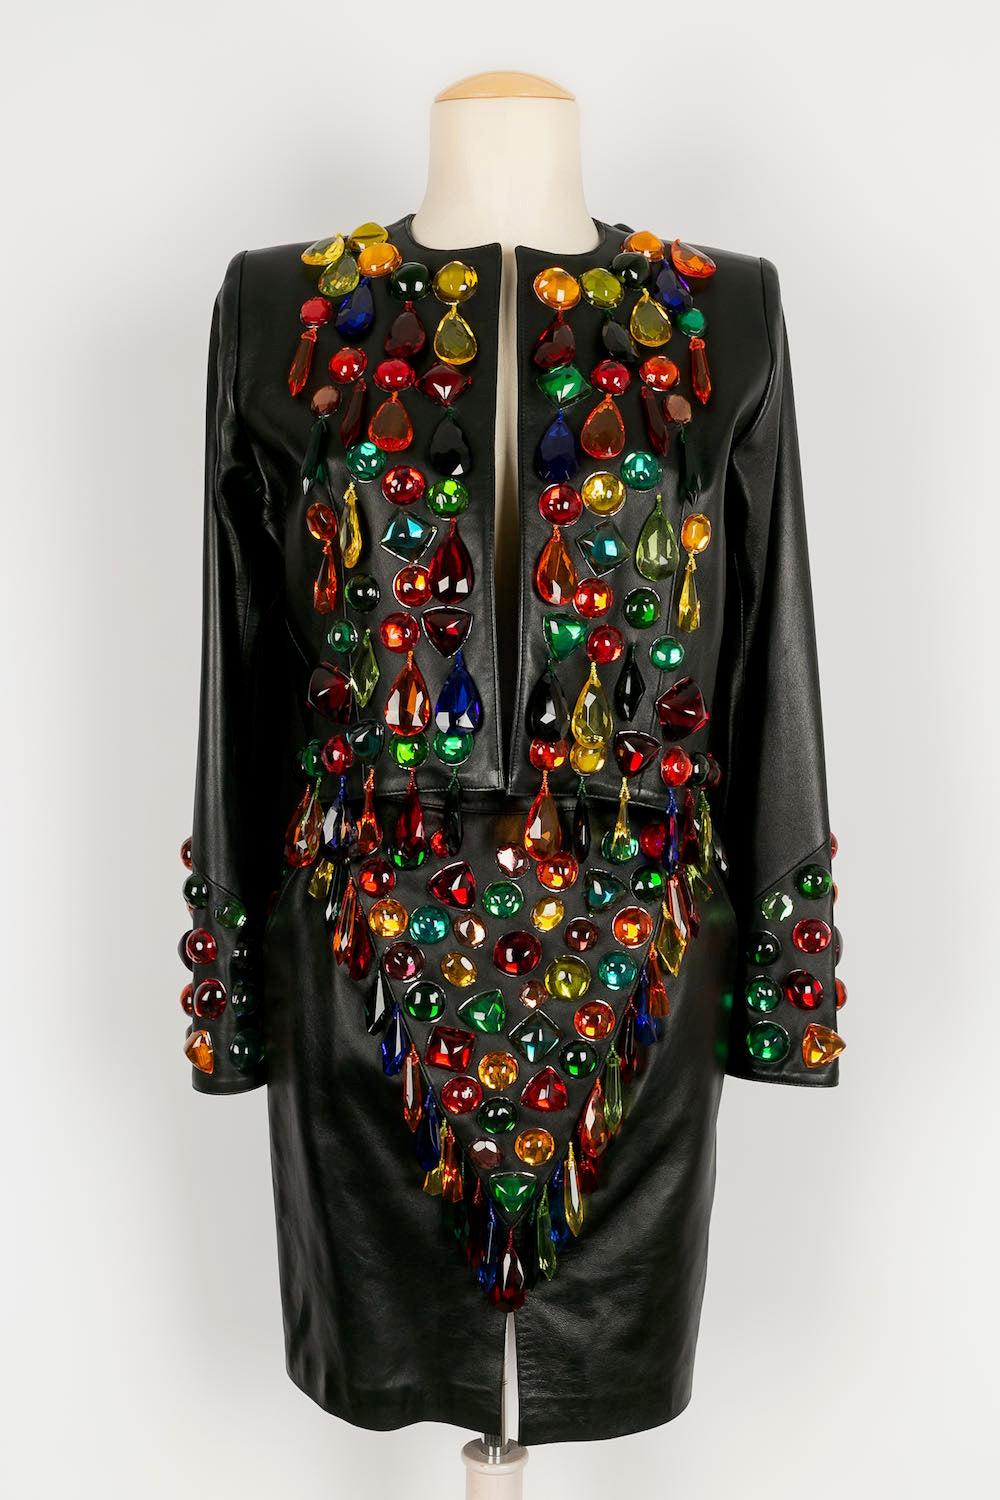 Yves Saint Laurent (Made in France) Amazing jacket and skirt set in leather decorated with multi-color chips. Size 36FR.
Collection Ready-to-Wear Spring-Summer 1990.
A few suits like this were made at the time, and one of them is in the personal